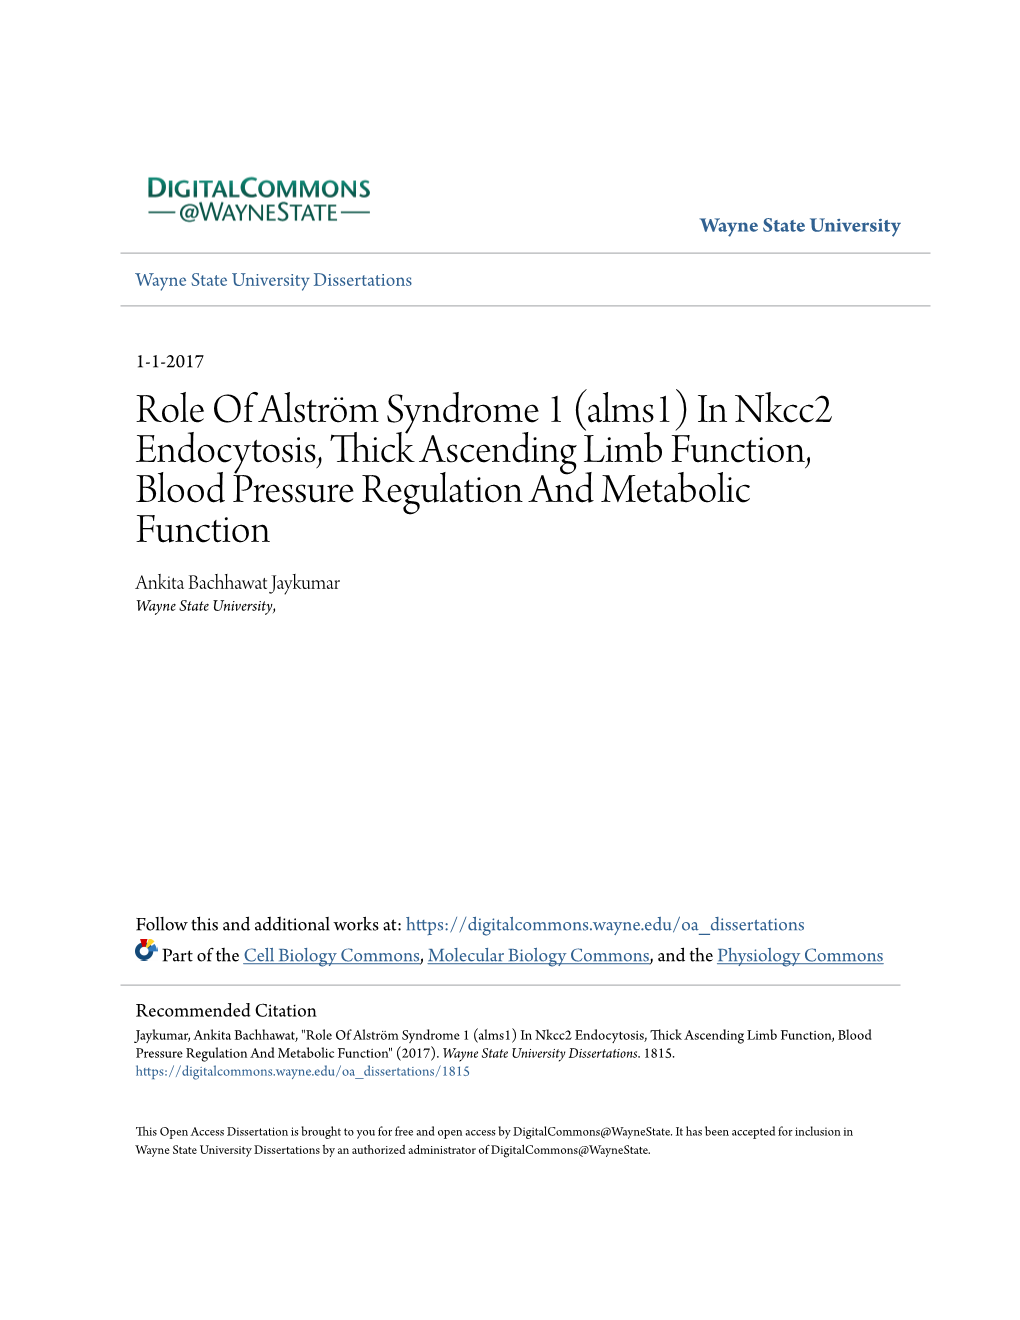 Role of Alström Syndrome 1 (Alms1) in Nkcc2 Endocytosis, Thick Ascending Limb Function, Blood Pressure Regulation and Metabolic